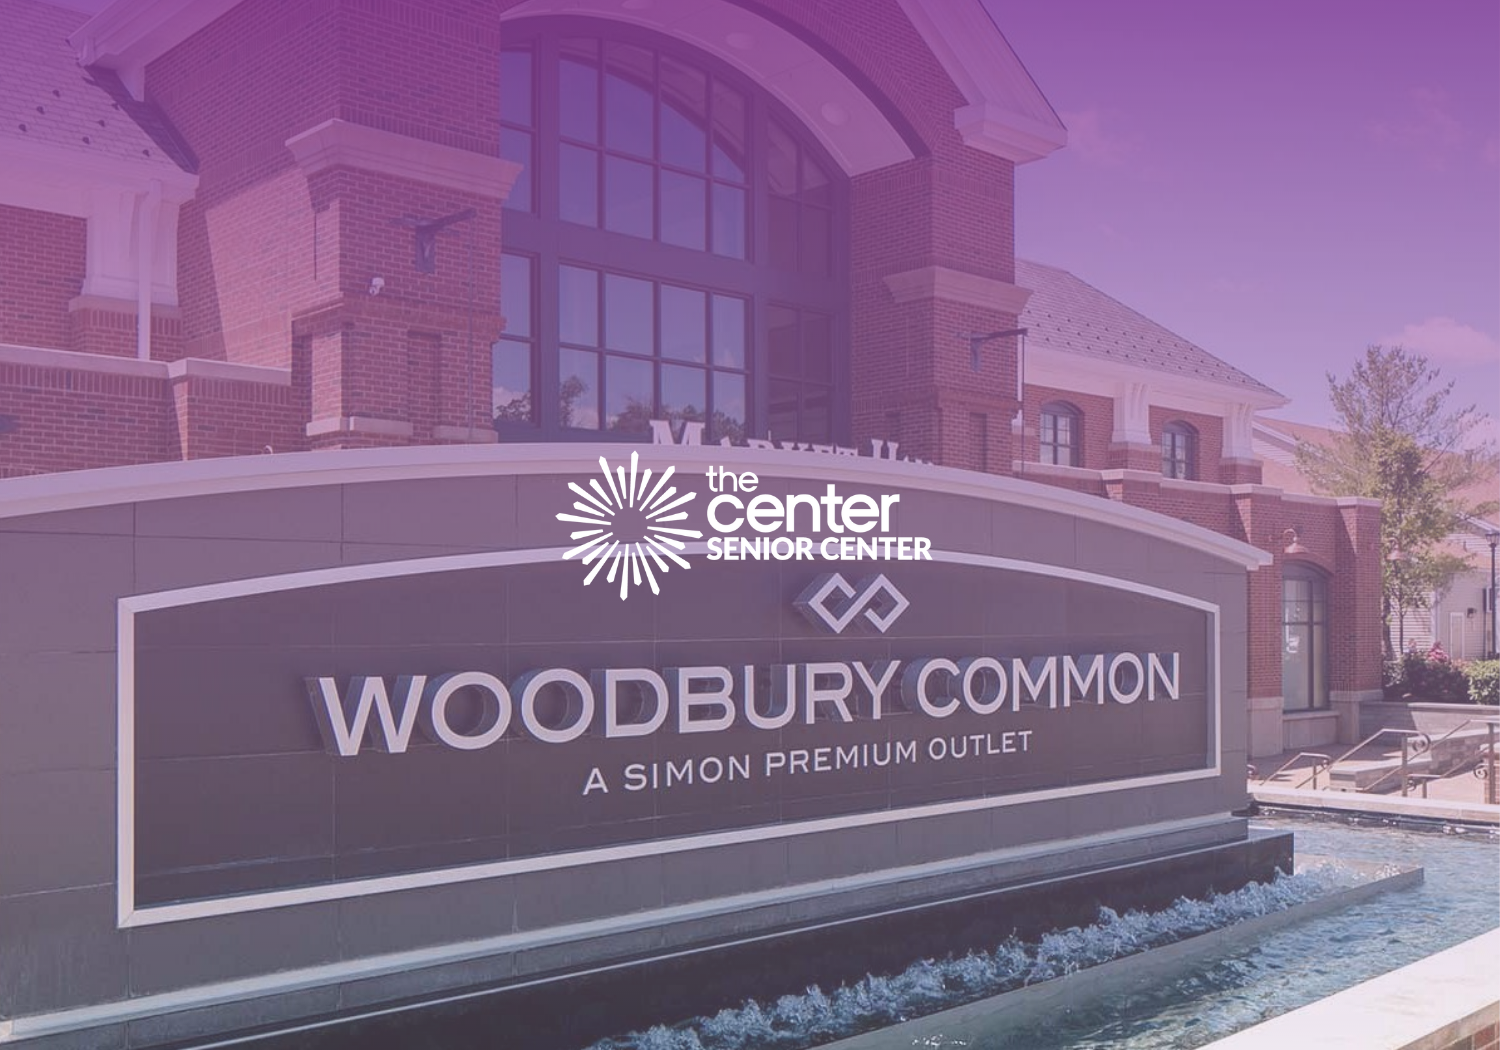 How to Get From New York City to Woodbury Commons